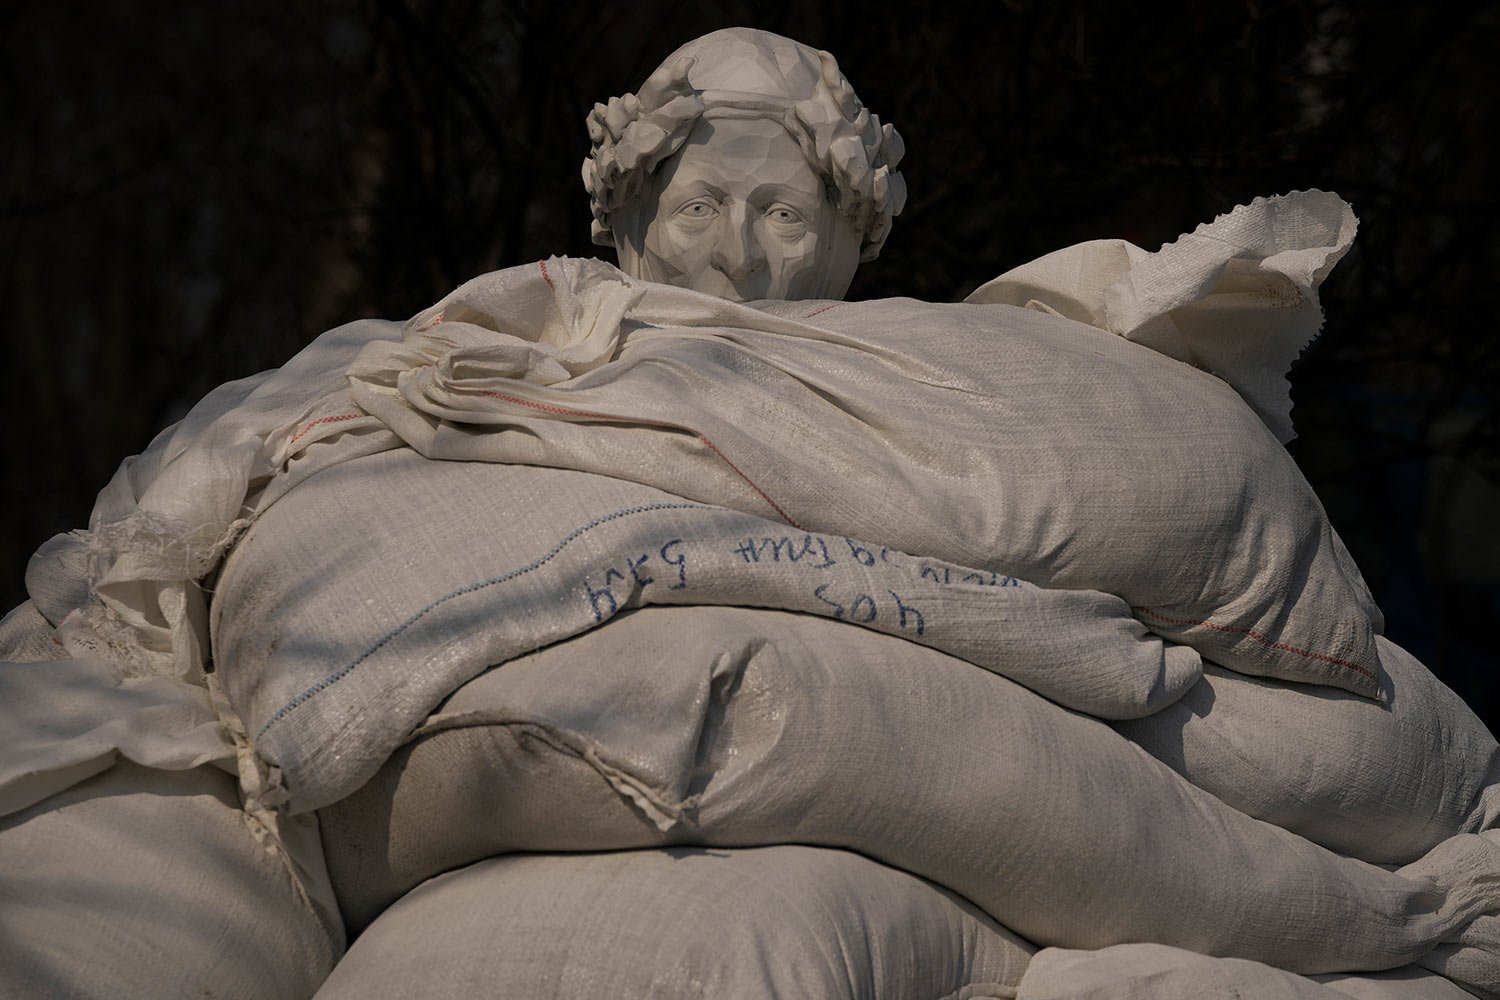  The statue of Italian poet and philosopher Dante Alighieri is almost covered with sandbags to protect it from potential damage from shelling, in Kyiv, Ukraine,Wednesday, March 23, 2022. (AP Photo/Vadim Ghirda) 